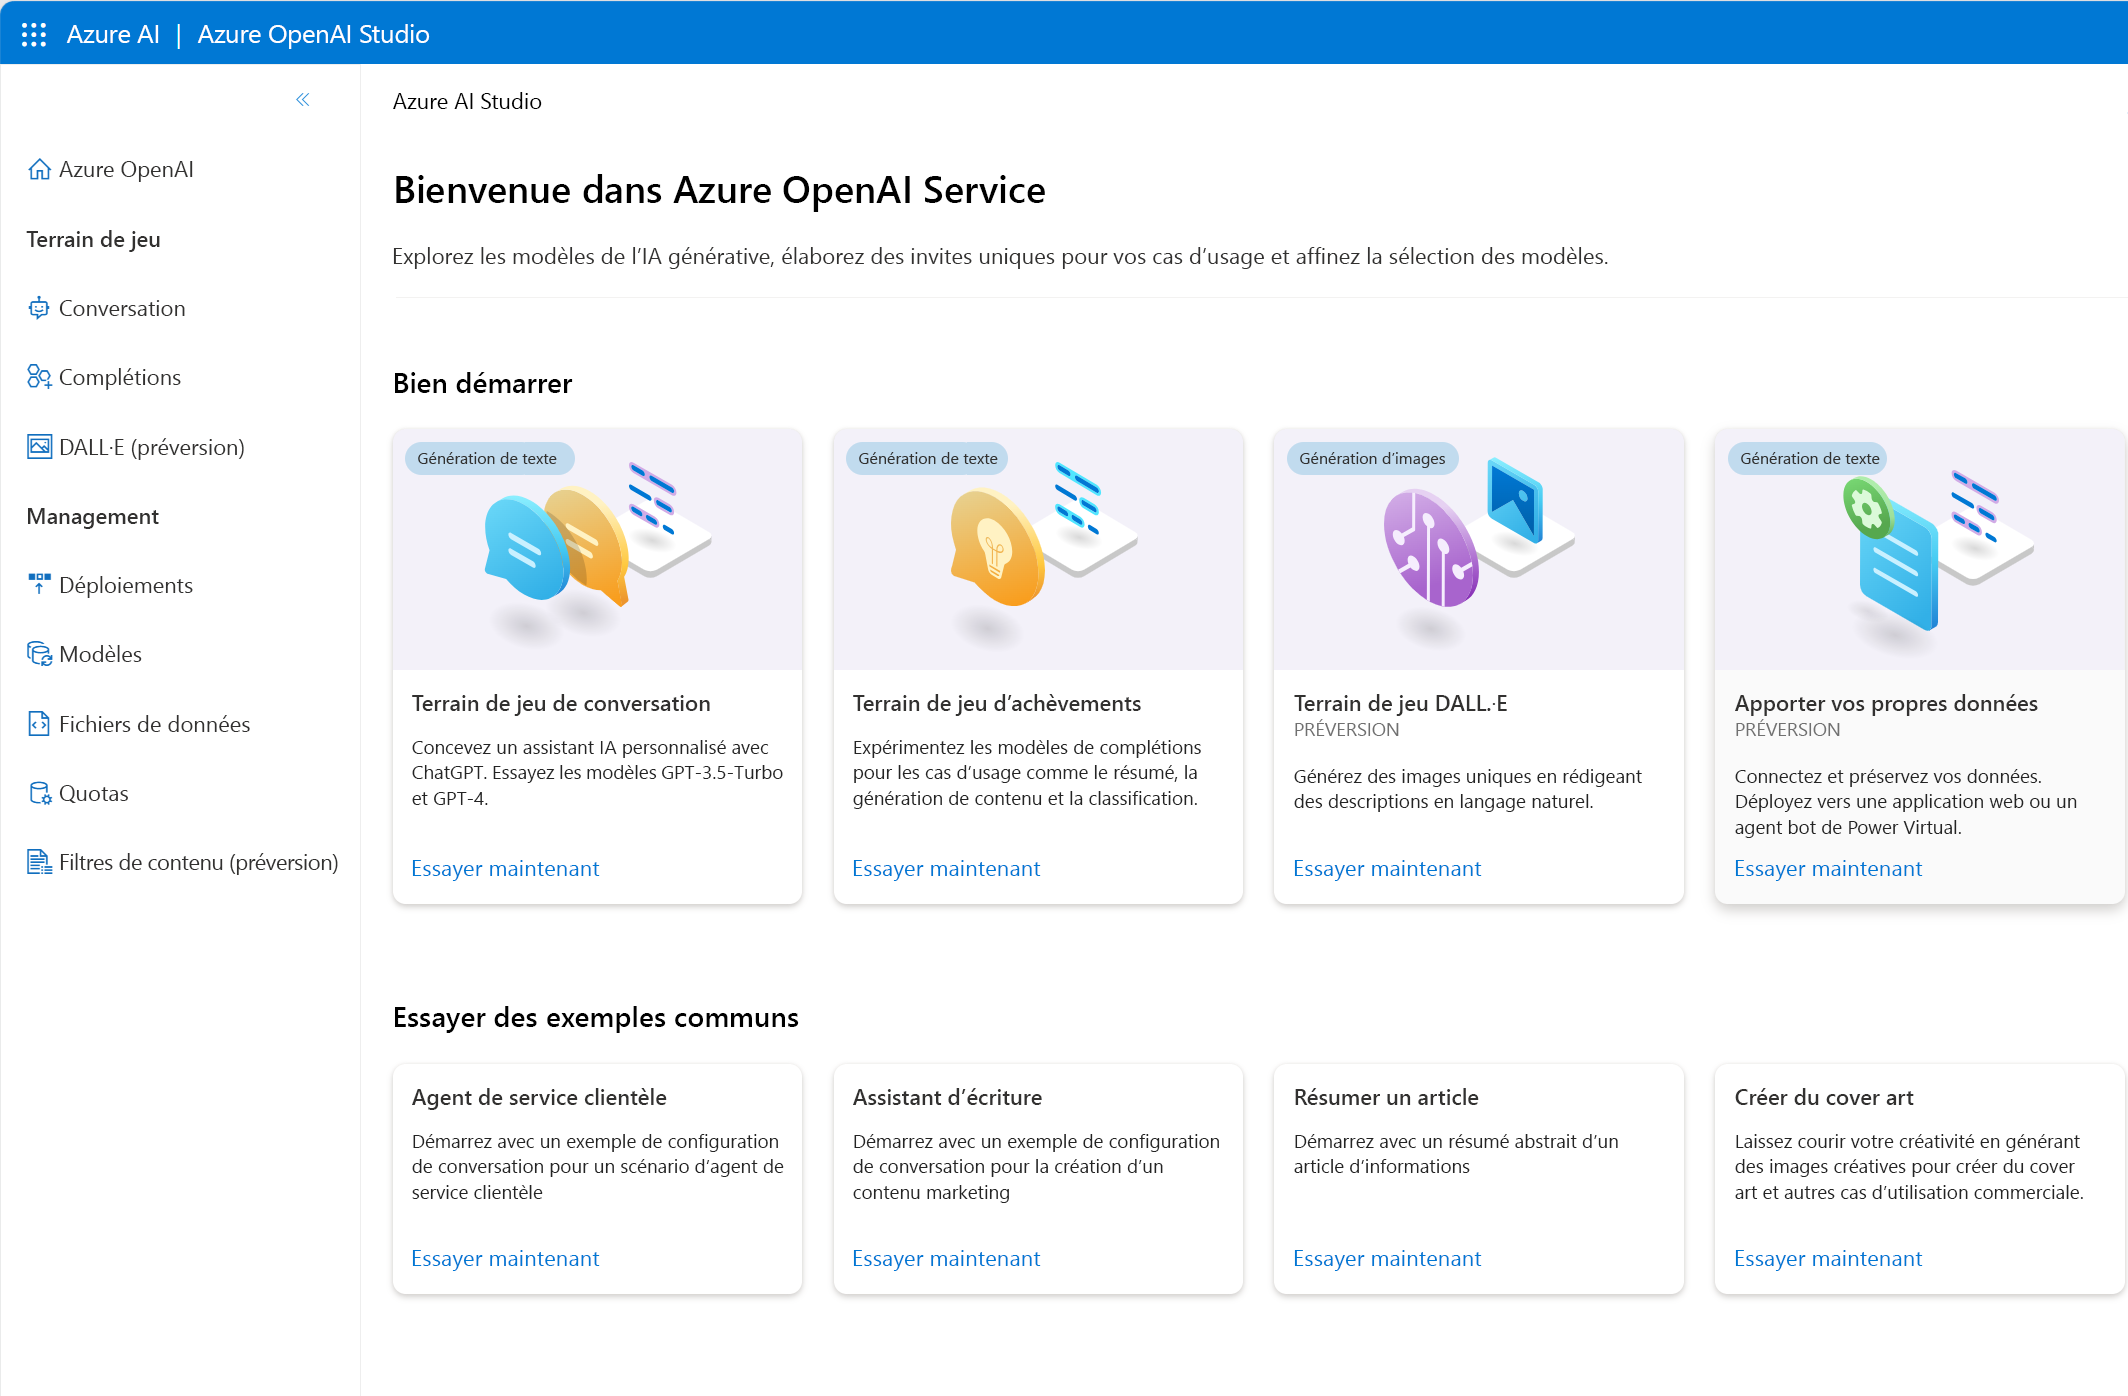 A screenshot of the home page of the Azure OpenAI studio interface which includes quick-start buttons.